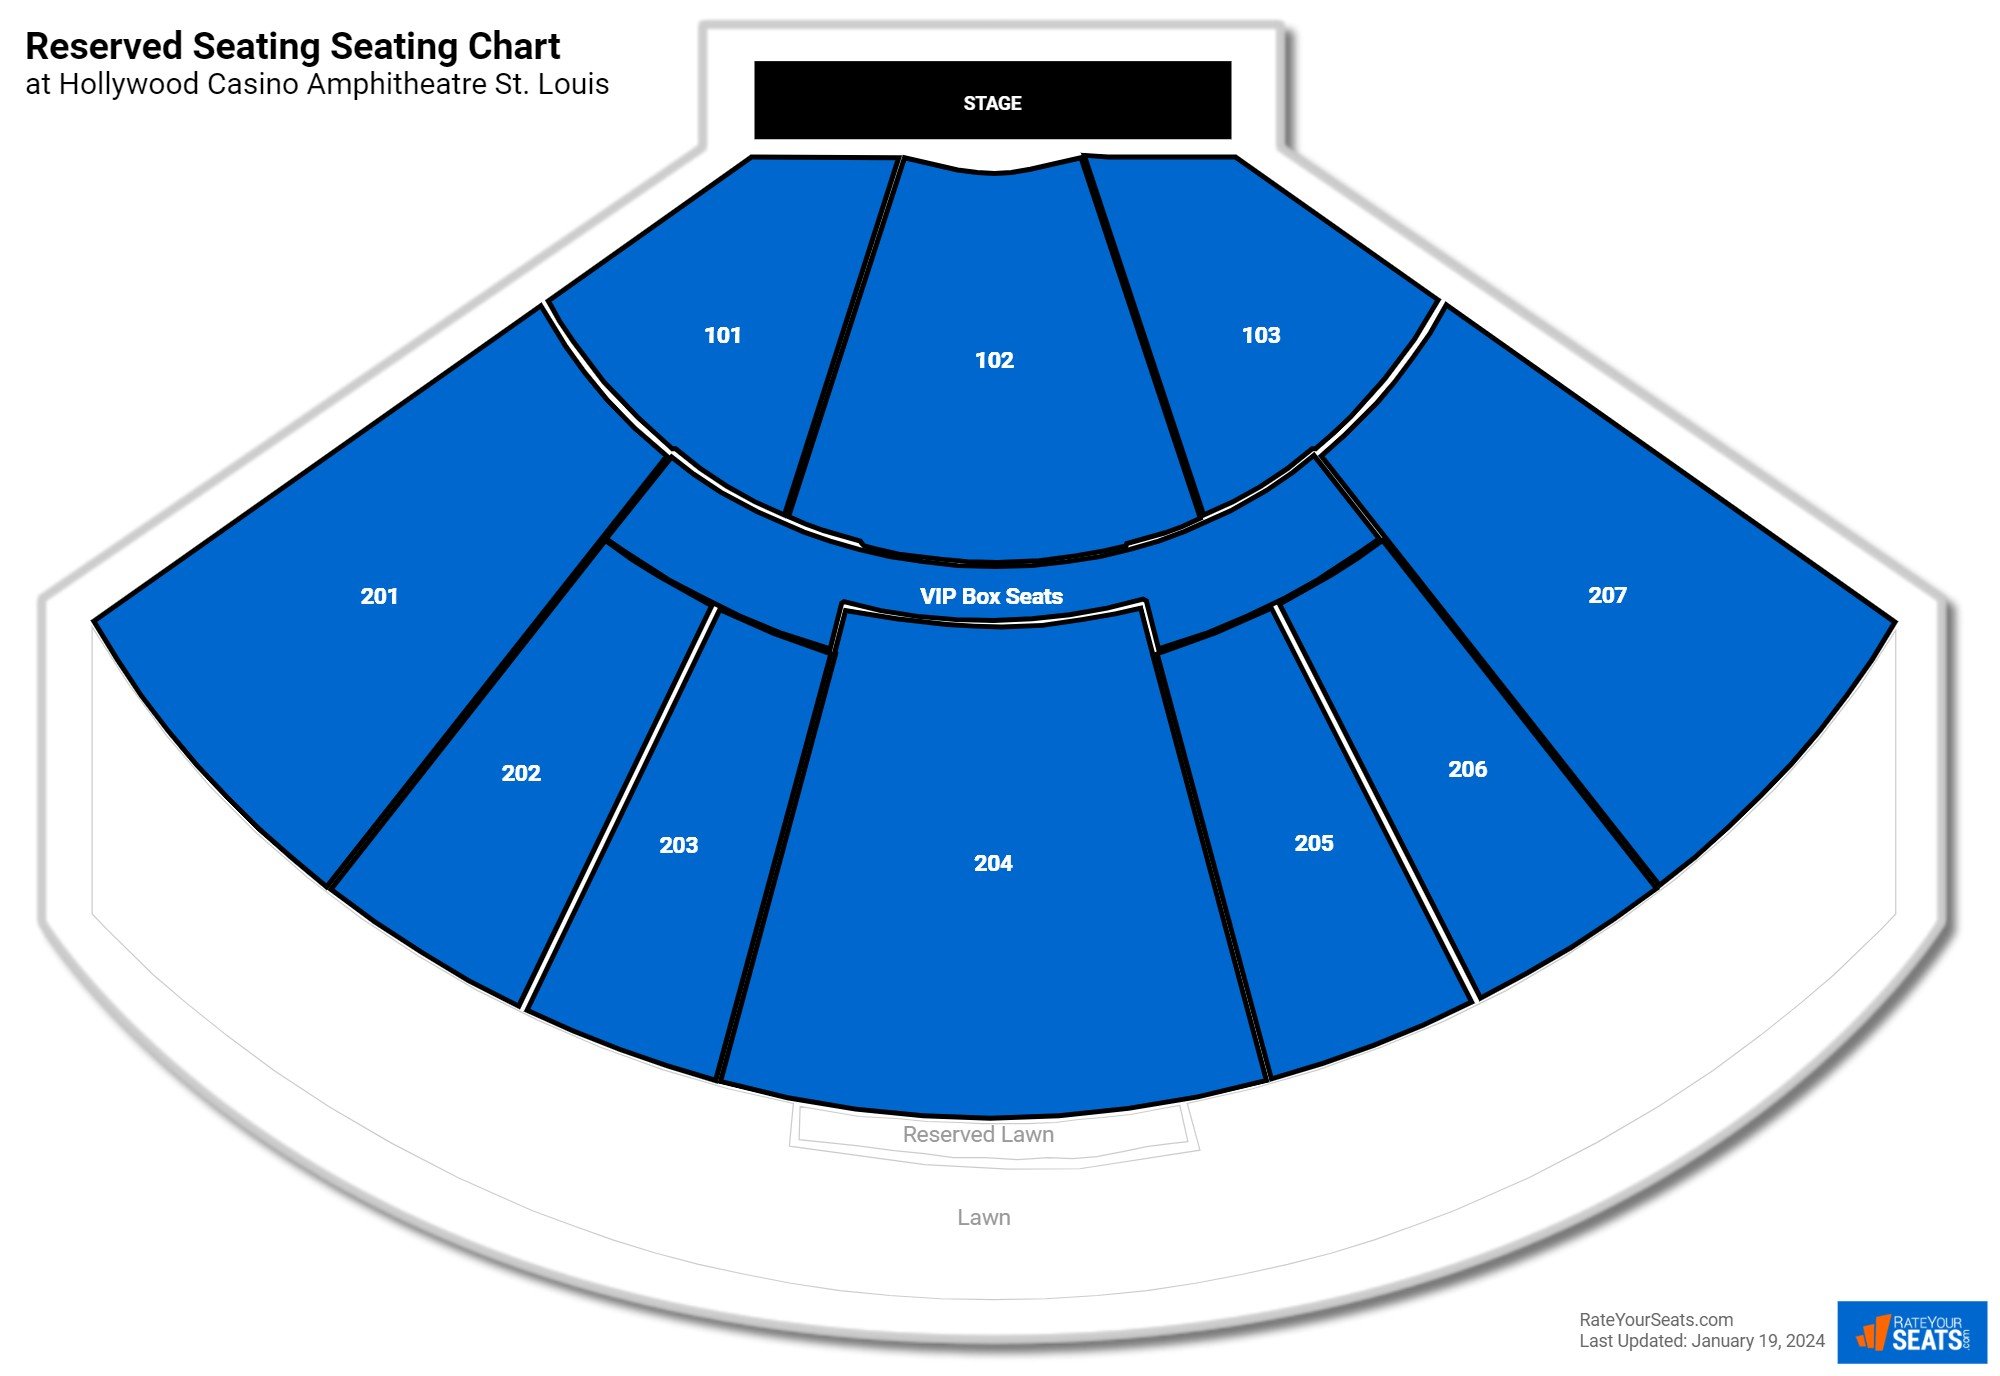 Concert Reserved Seating Seating Chart at Hollywood Casino Amphitheatre St. Louis